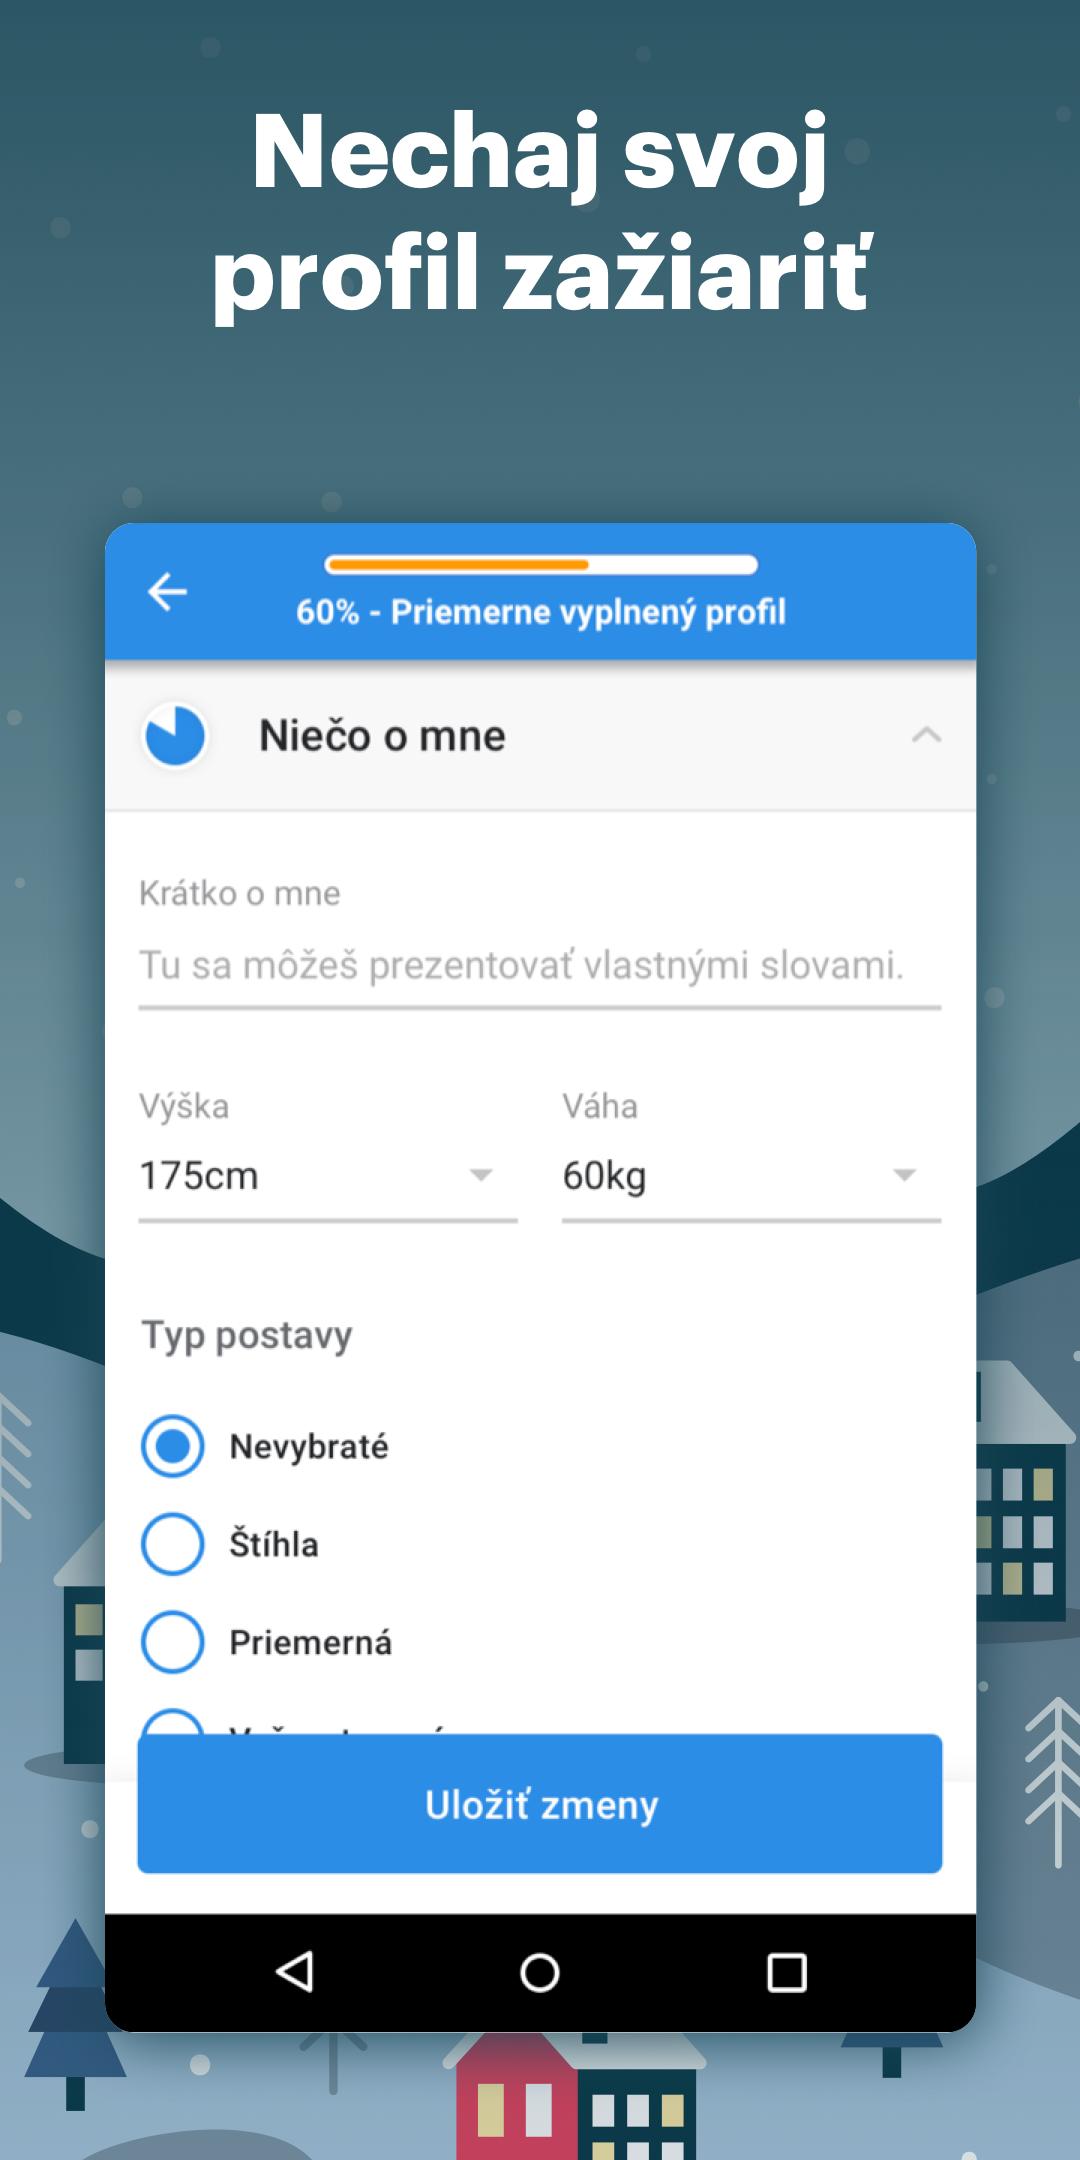 Pokec.sk for Android - APK Download